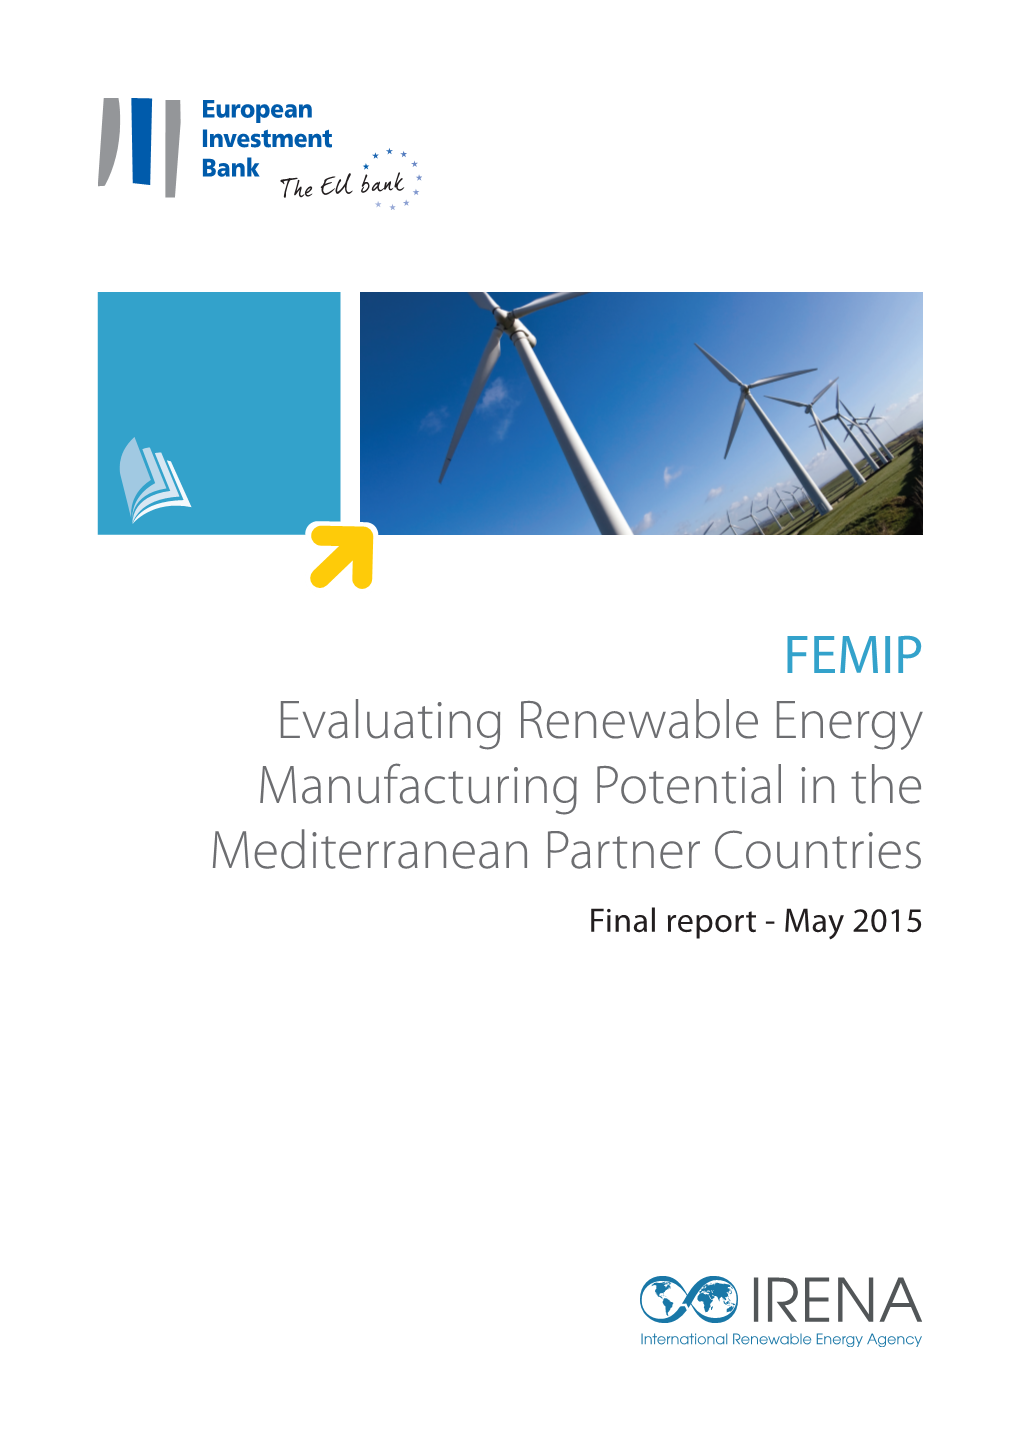 Evaluating Renewable Energy Manufacturing Potential in the Mediterranean Partner Countries Final Report - May 2015